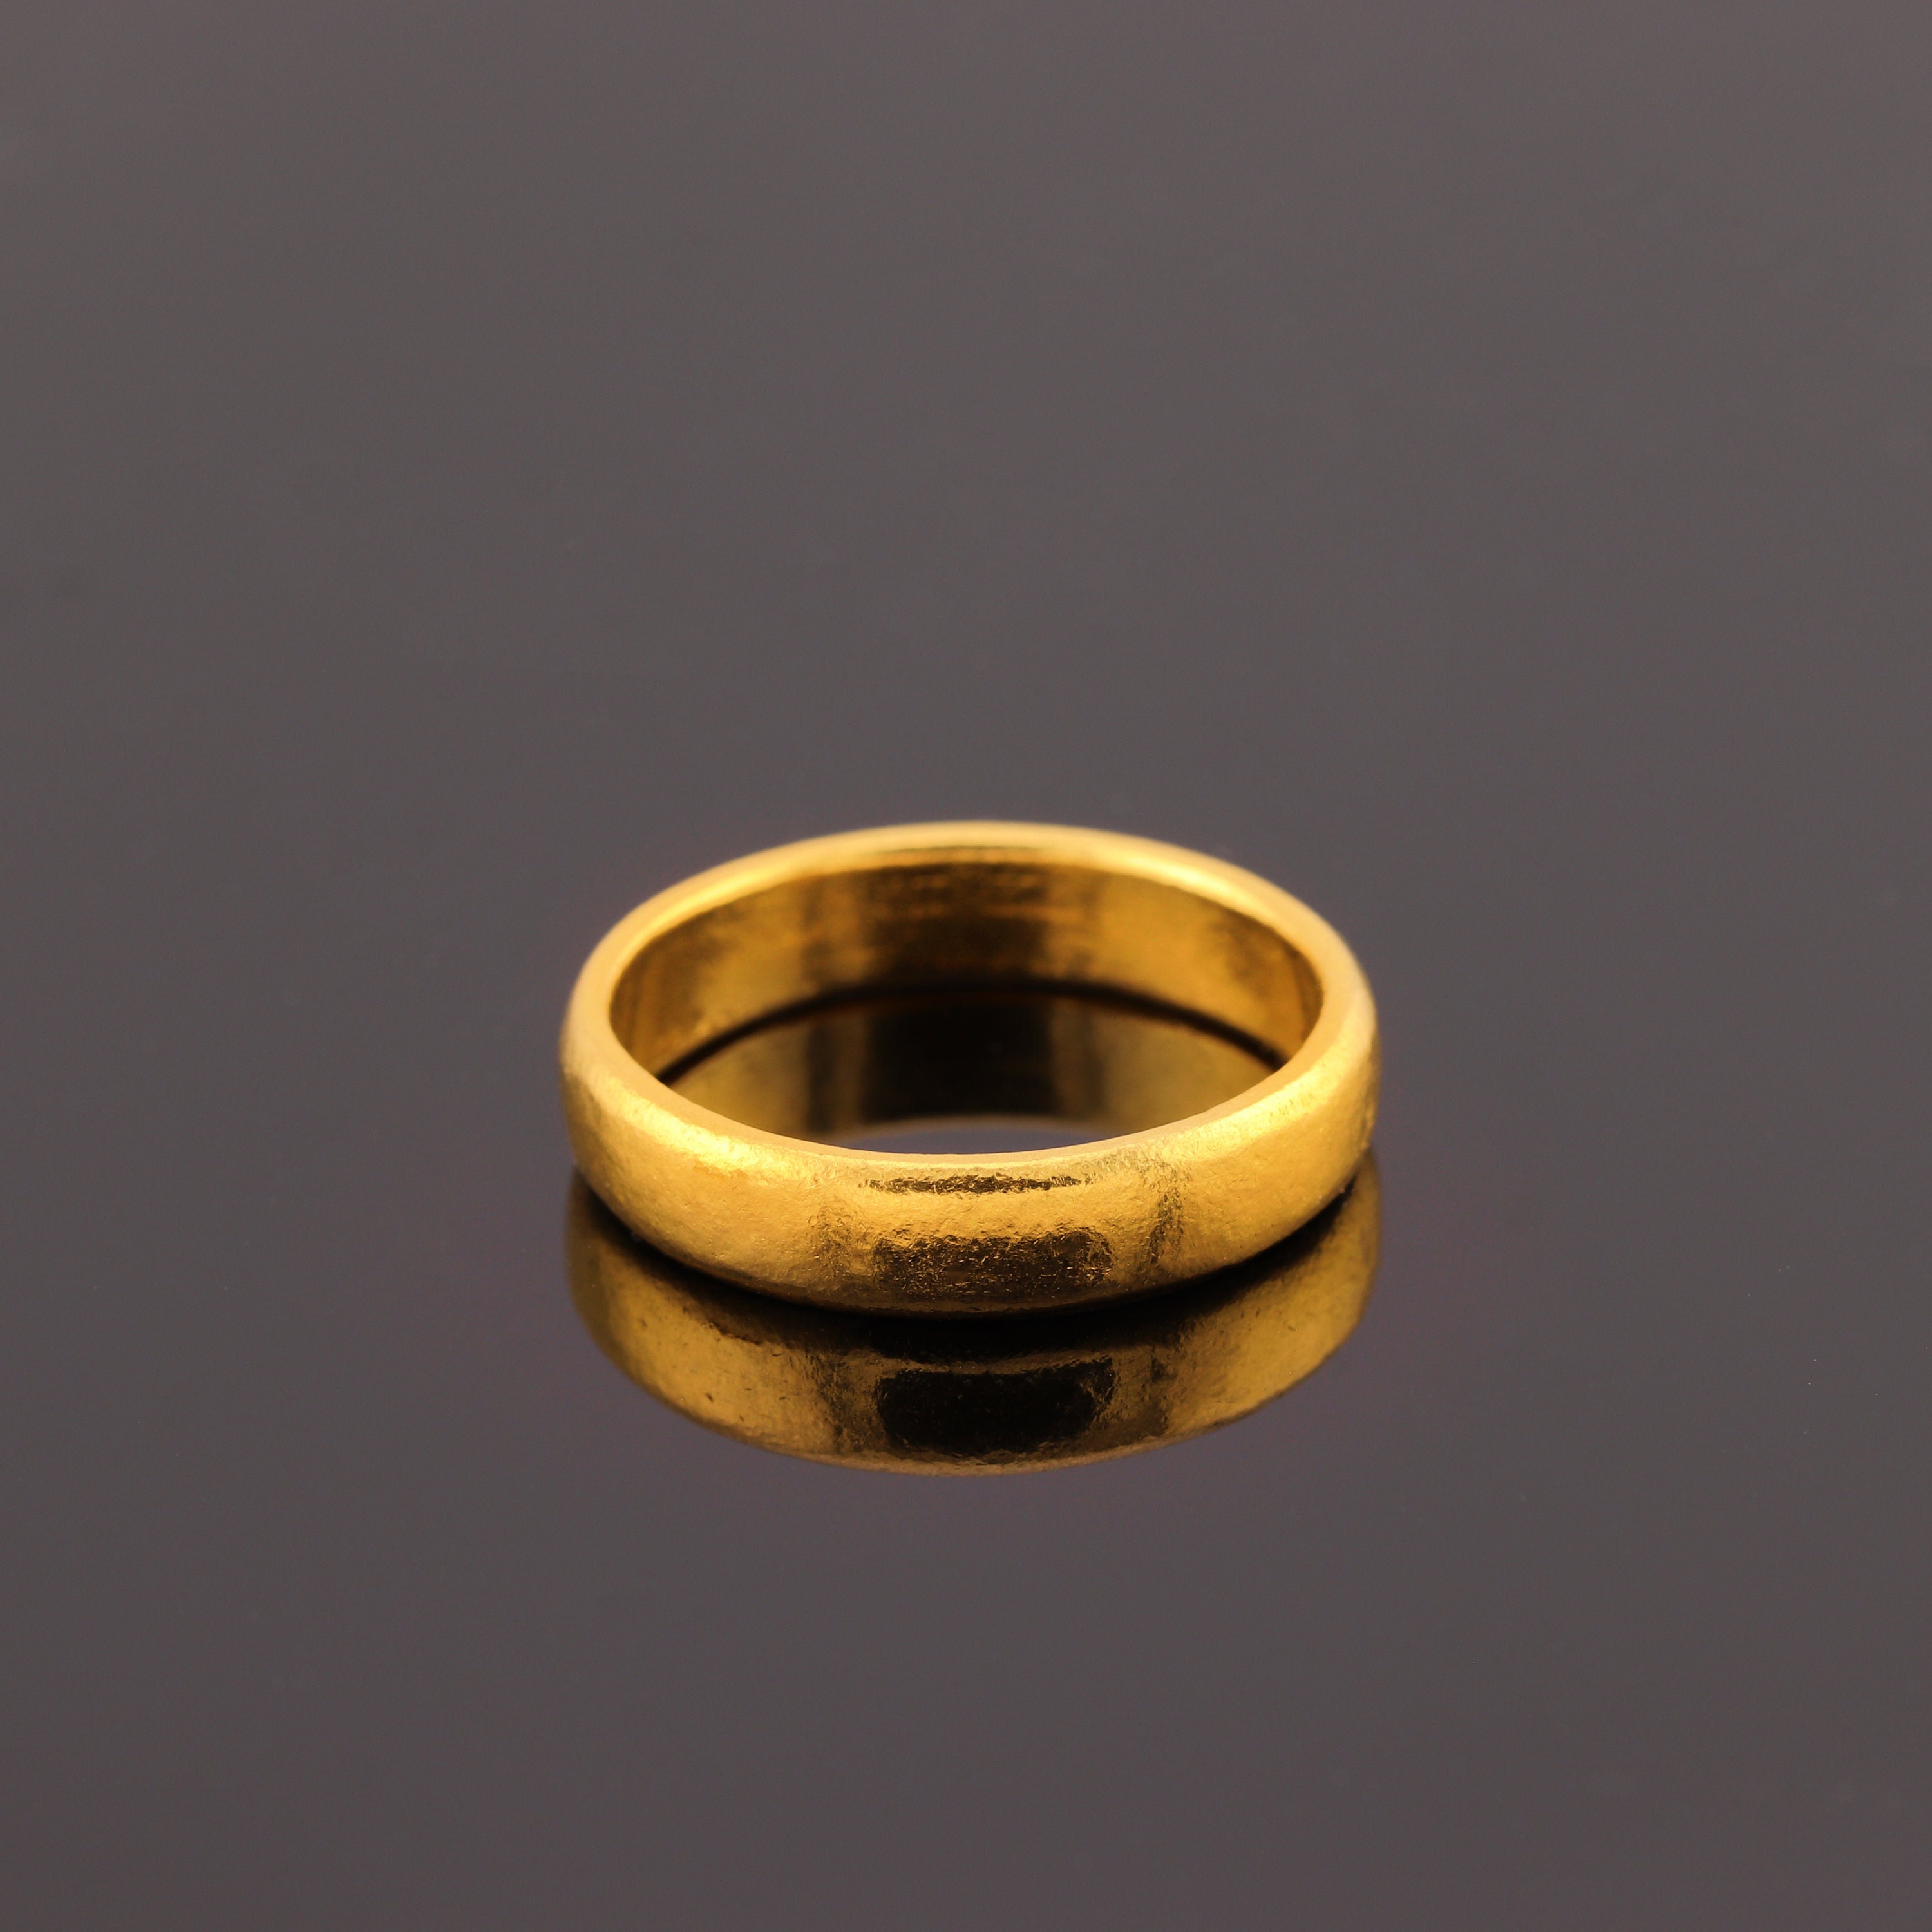 Buy 24K Gold Ring, Pure Gold 999.9, Solidly Hammered Men's Ring, Handmade,  Unique Design, Customizable and Personalizable Online in India - Etsy